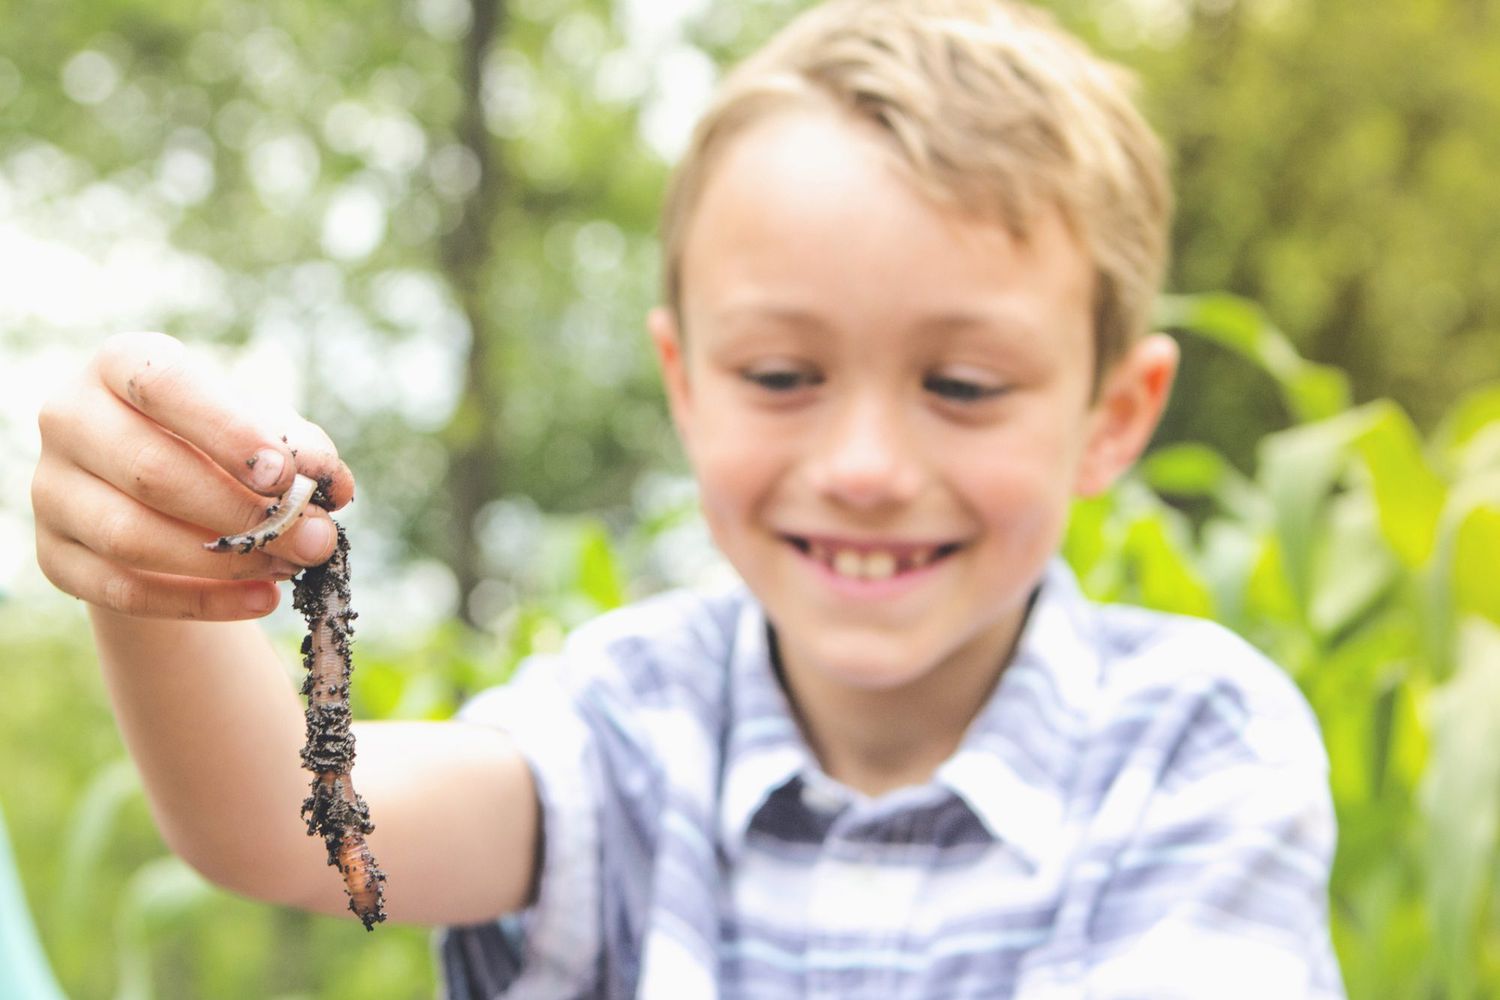 An image of a boy holding a worm.